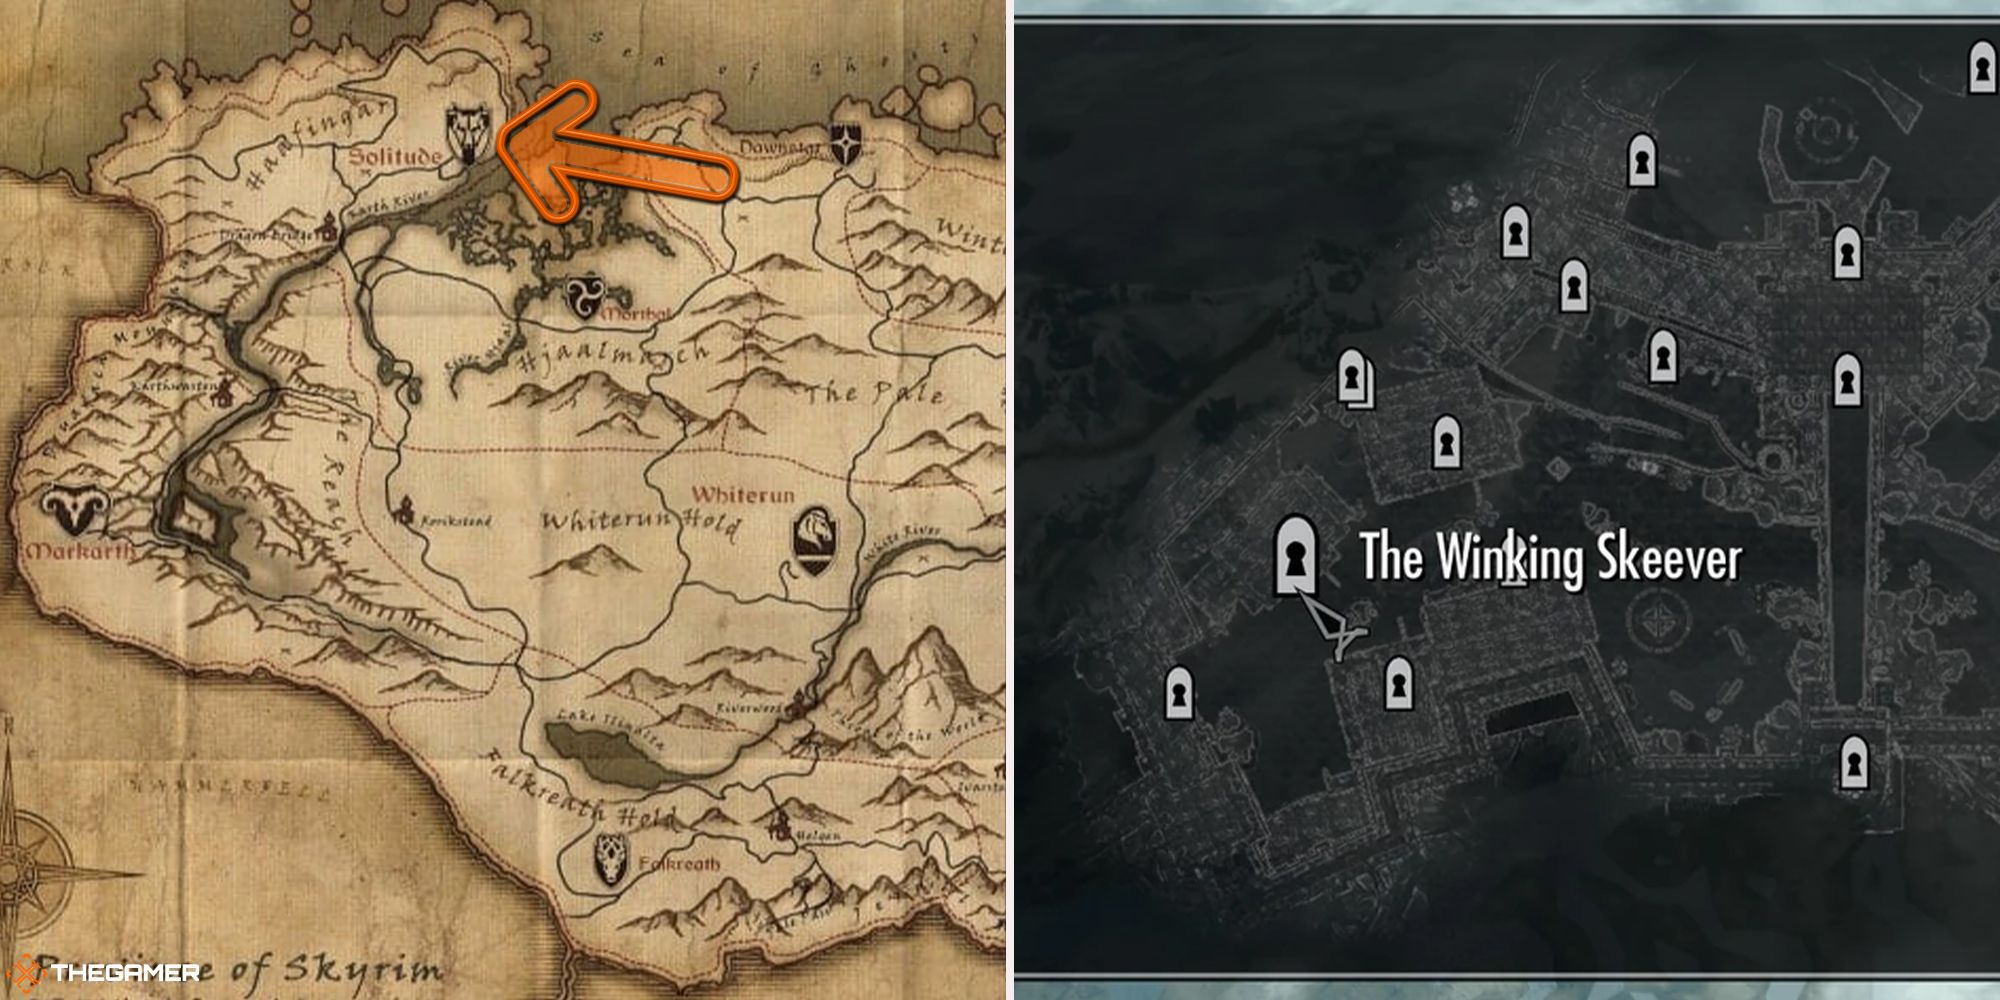 Skyrim - Belrand's location at the Winking Skeever on the map